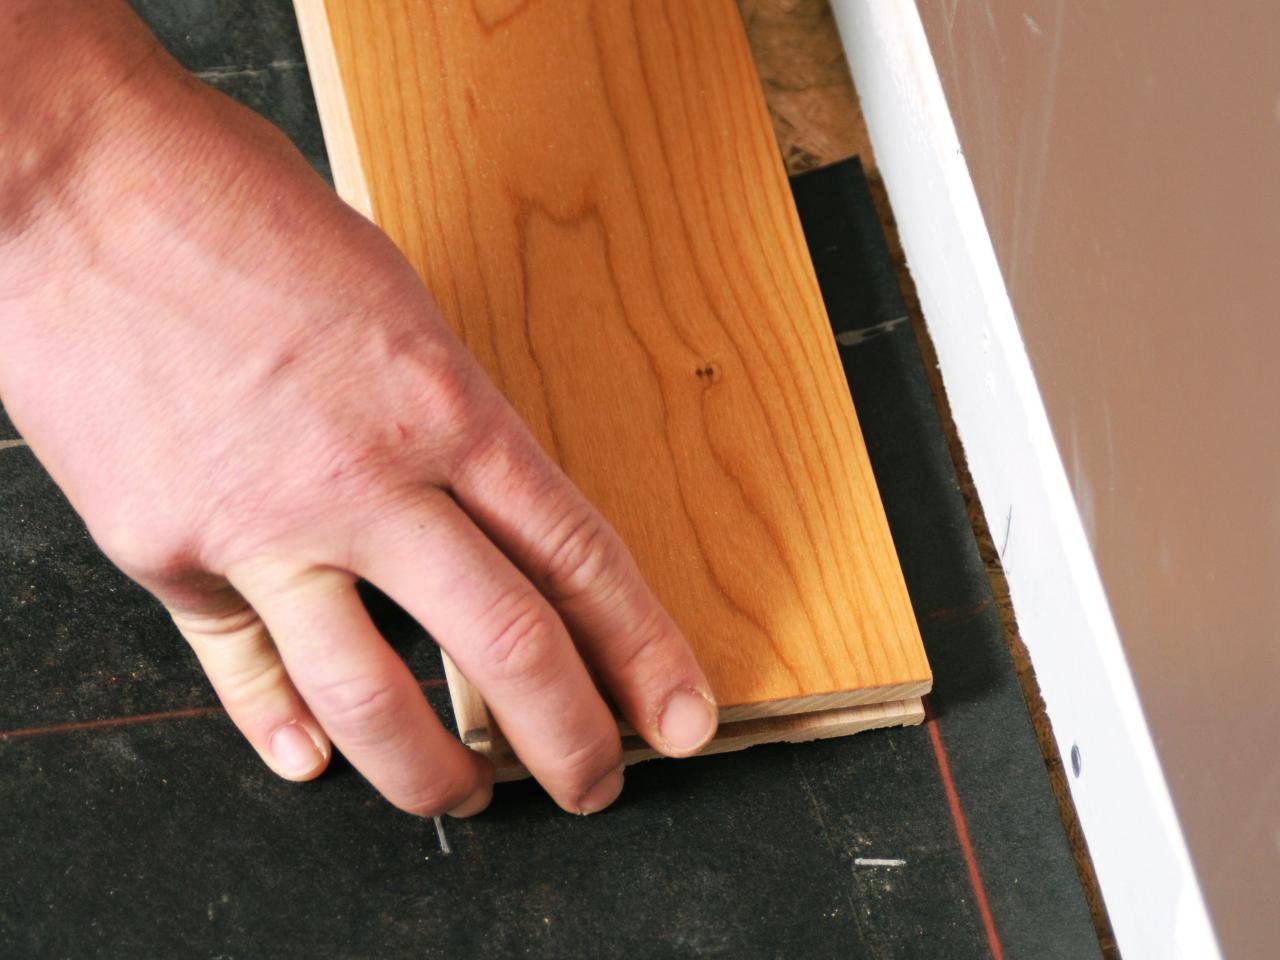 How To Install Prefinished Solid, Nail Down Prefinished Hardwood Flooring